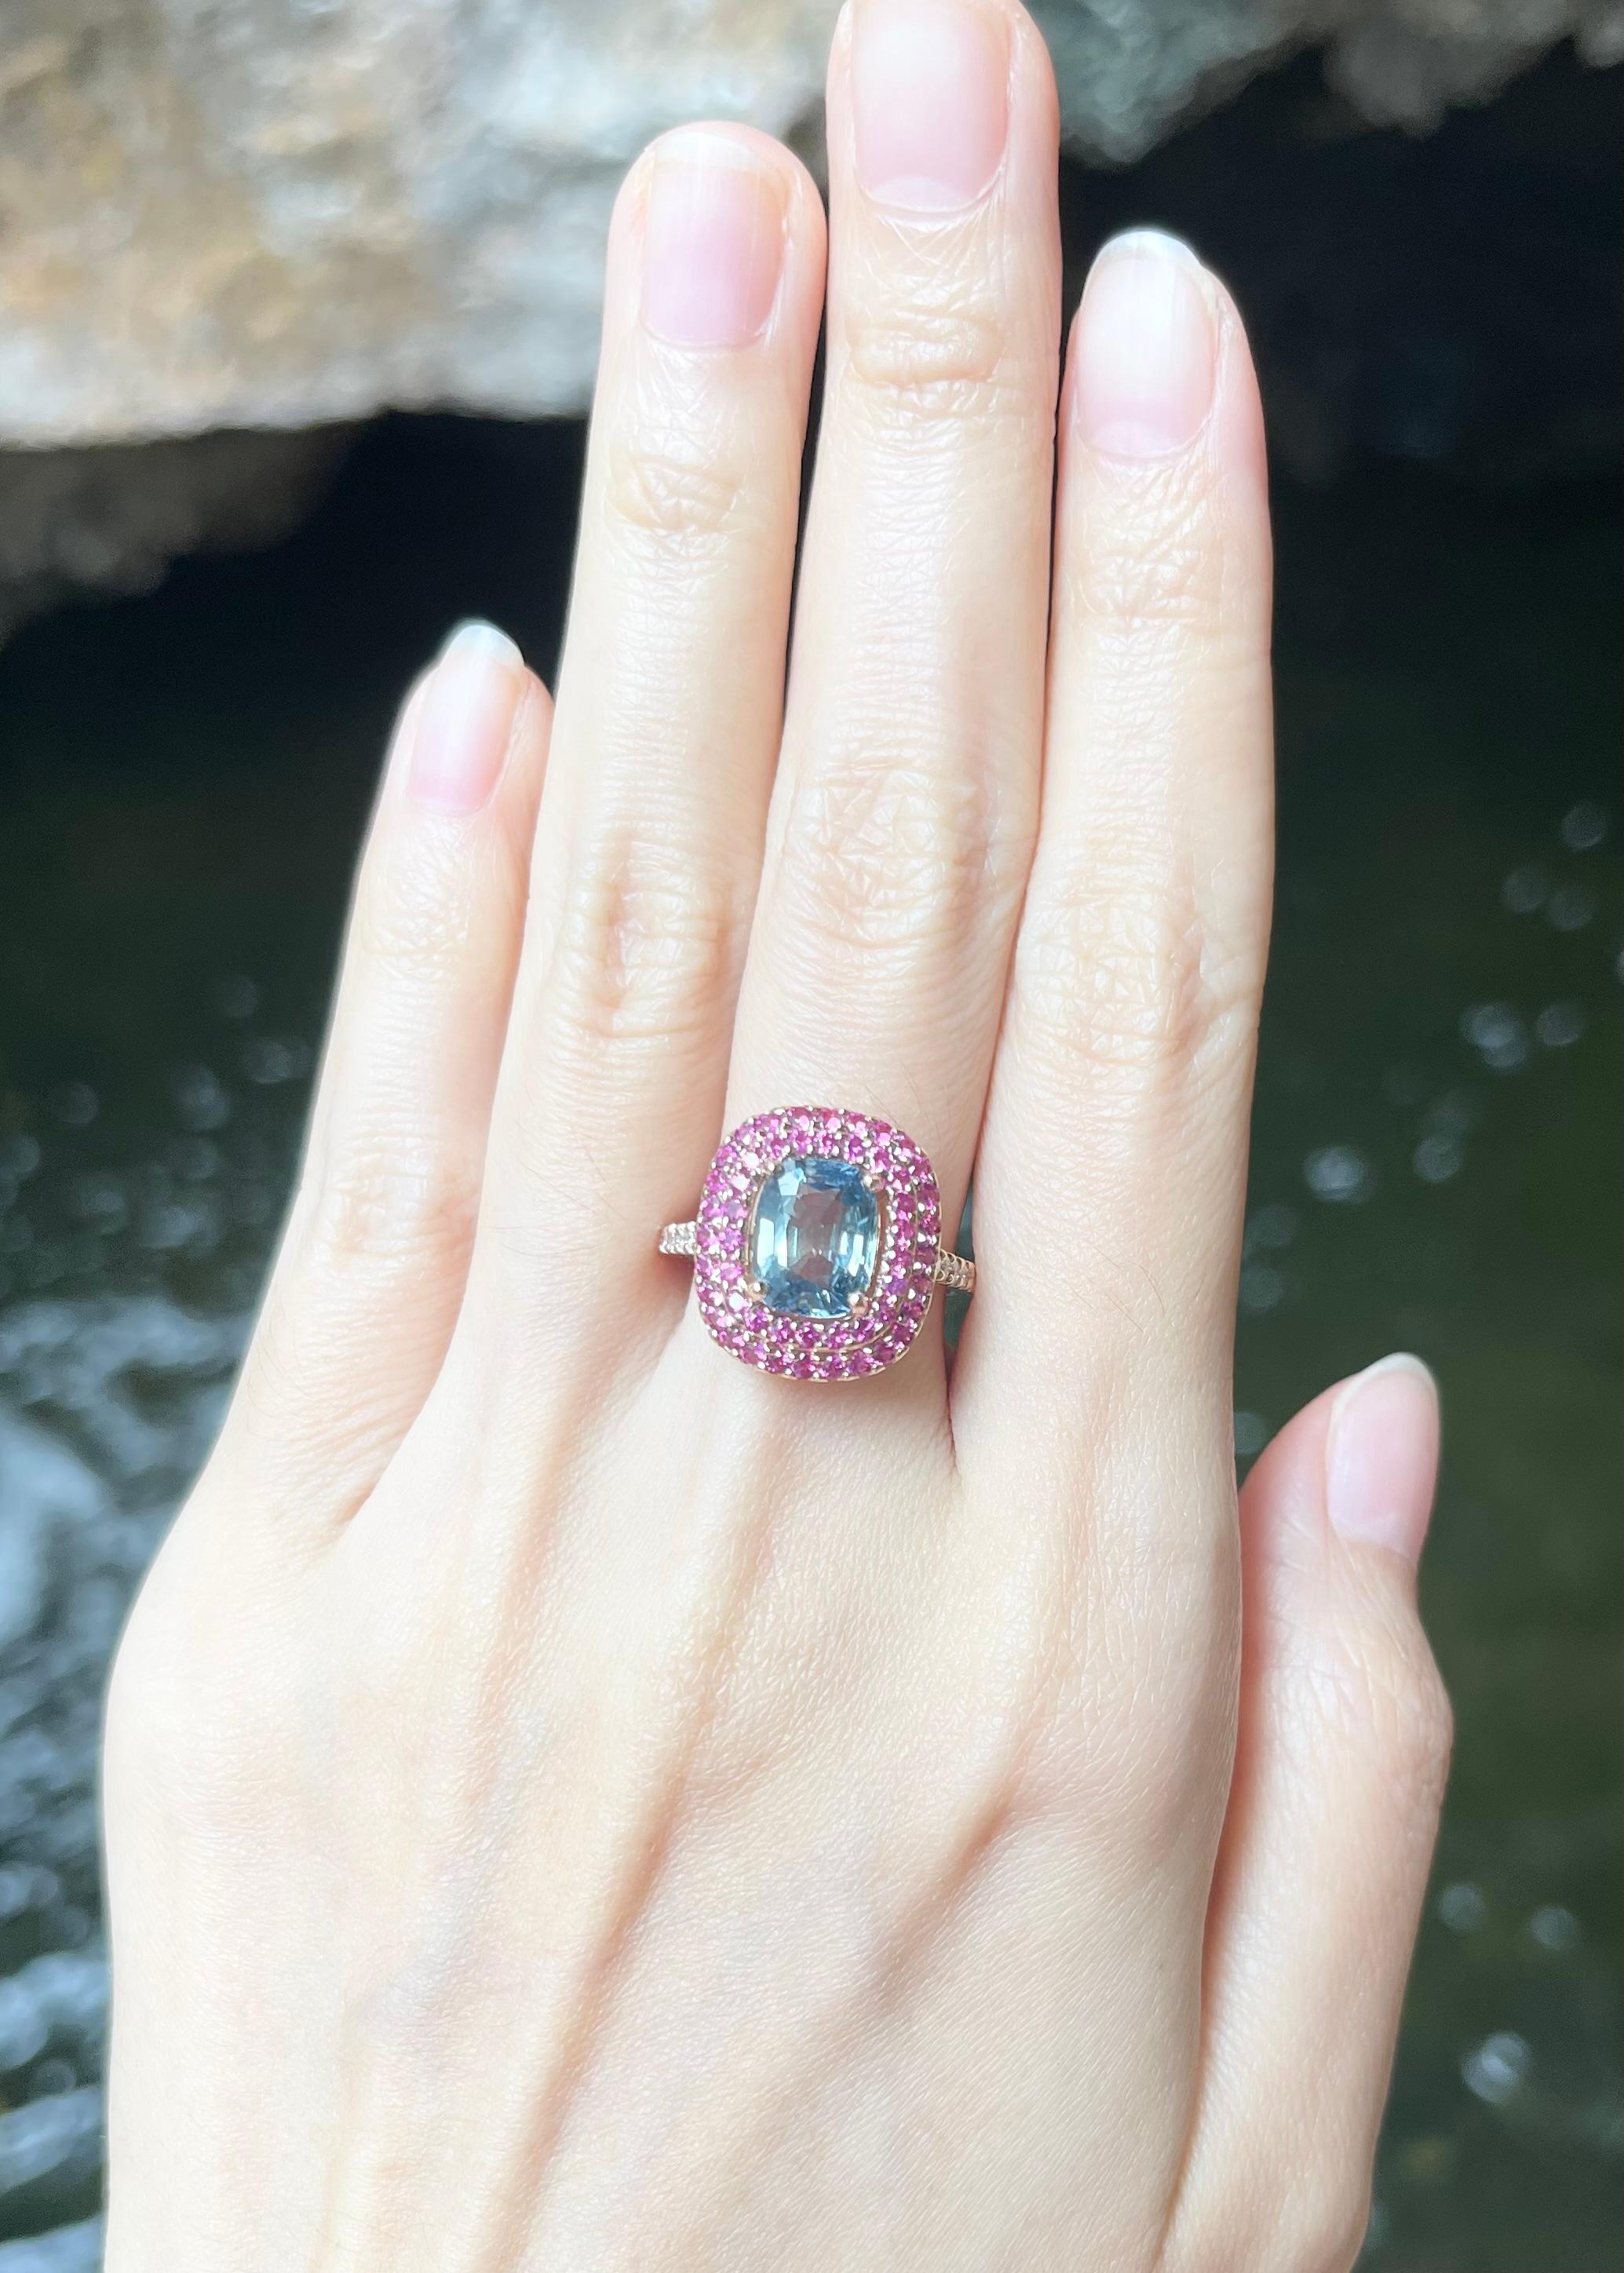 Green Sapphire 2.62 carats, Pink Sapphire 0.80 carat and Diamond 0.29 carat Ring set in 18K Rose Gold Settings

Width:  1.5 cm 
Length: 1.6 cm
Ring Size: 54
Total Weight: 5.62 grams

Green Sapphire
Width:  0.8 cm 
Length:0.9 cm

